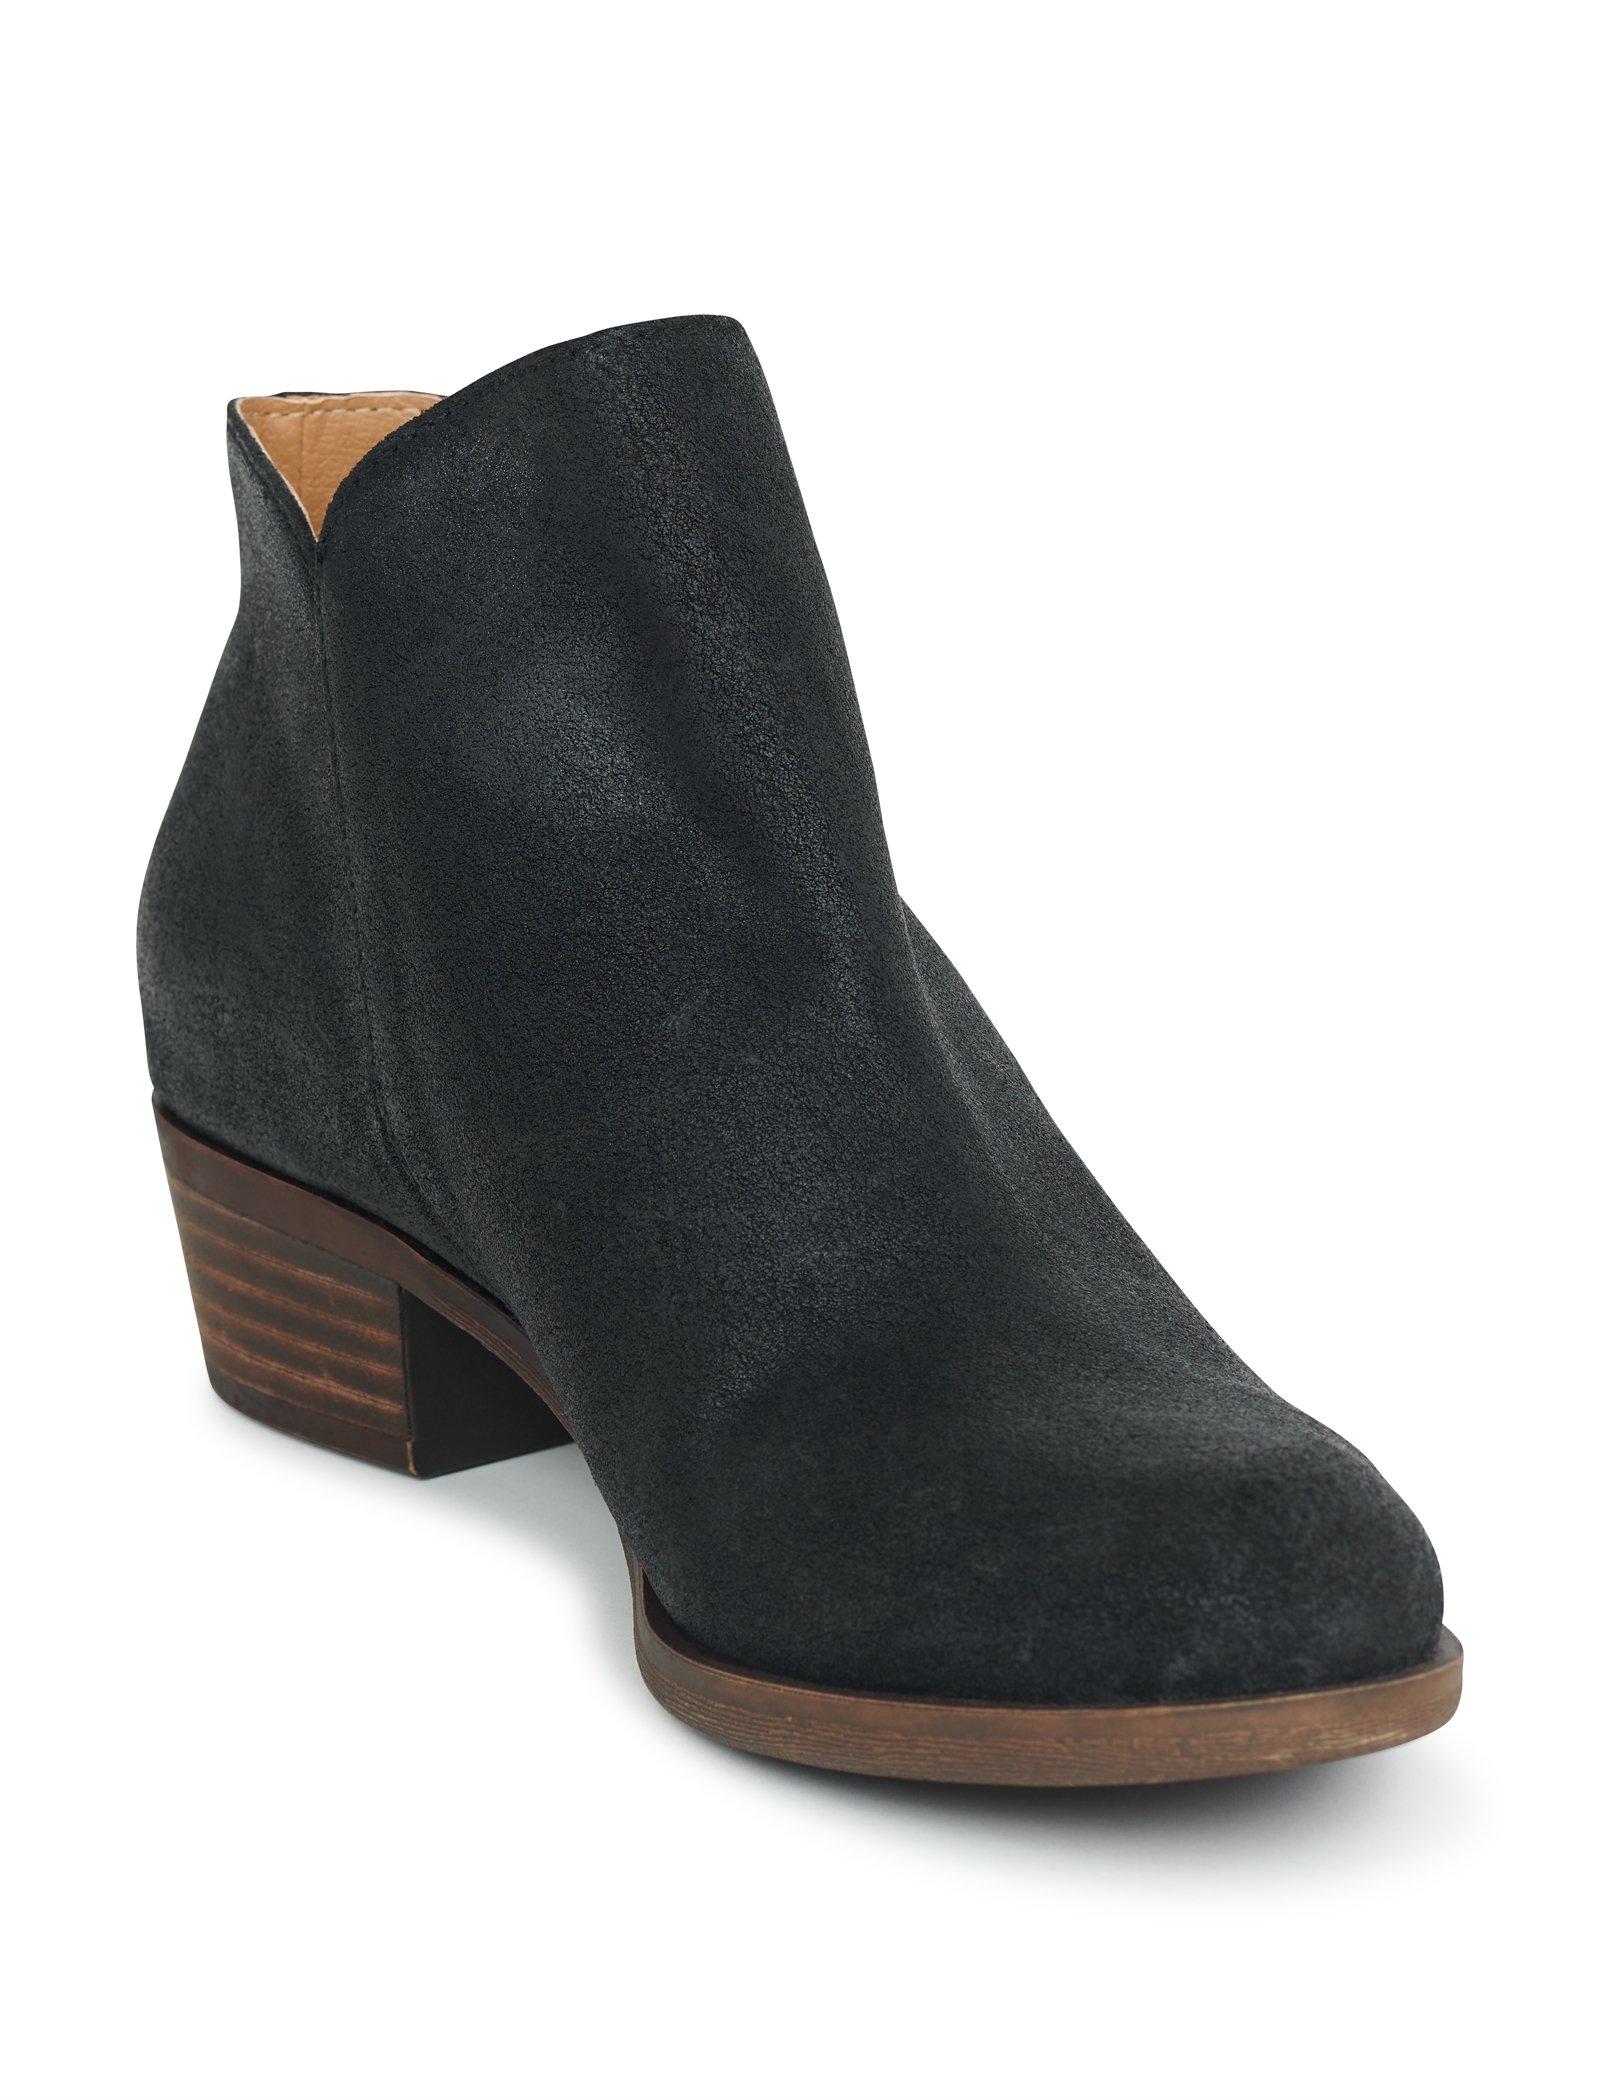 lucky brand gray suede booties